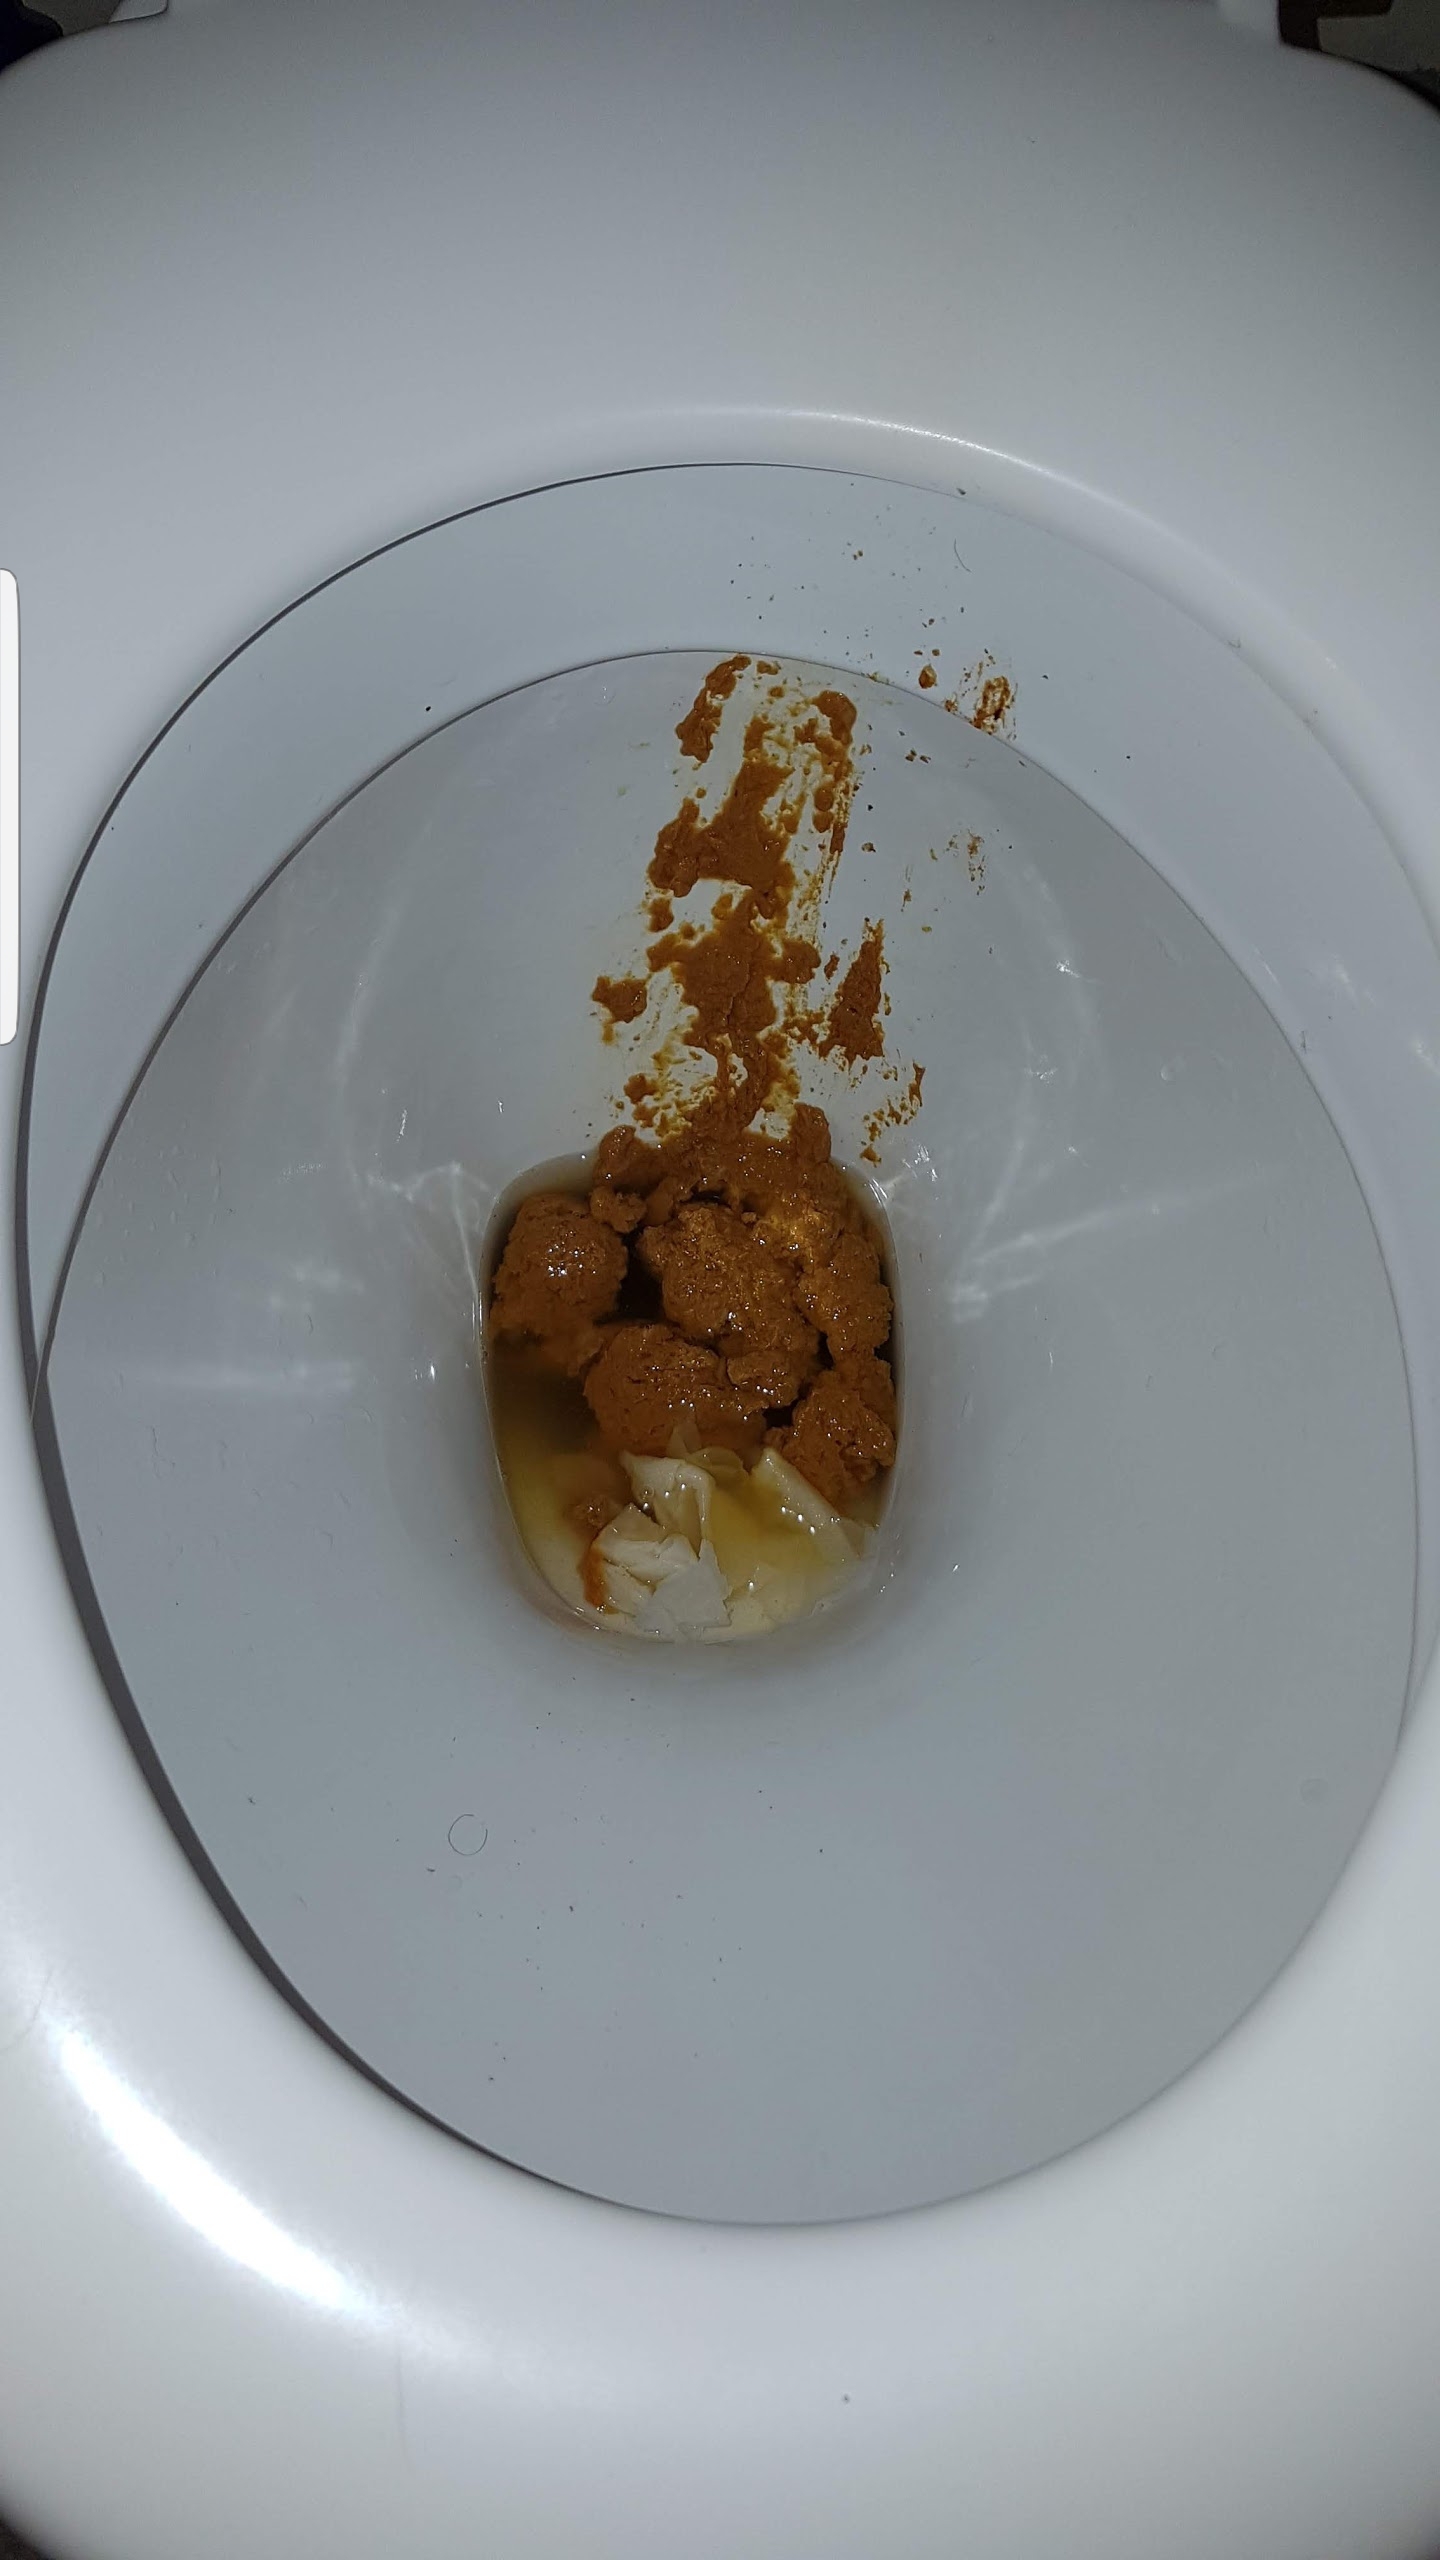 Sloppy wet shit on connors loo and he hid the loo roll again